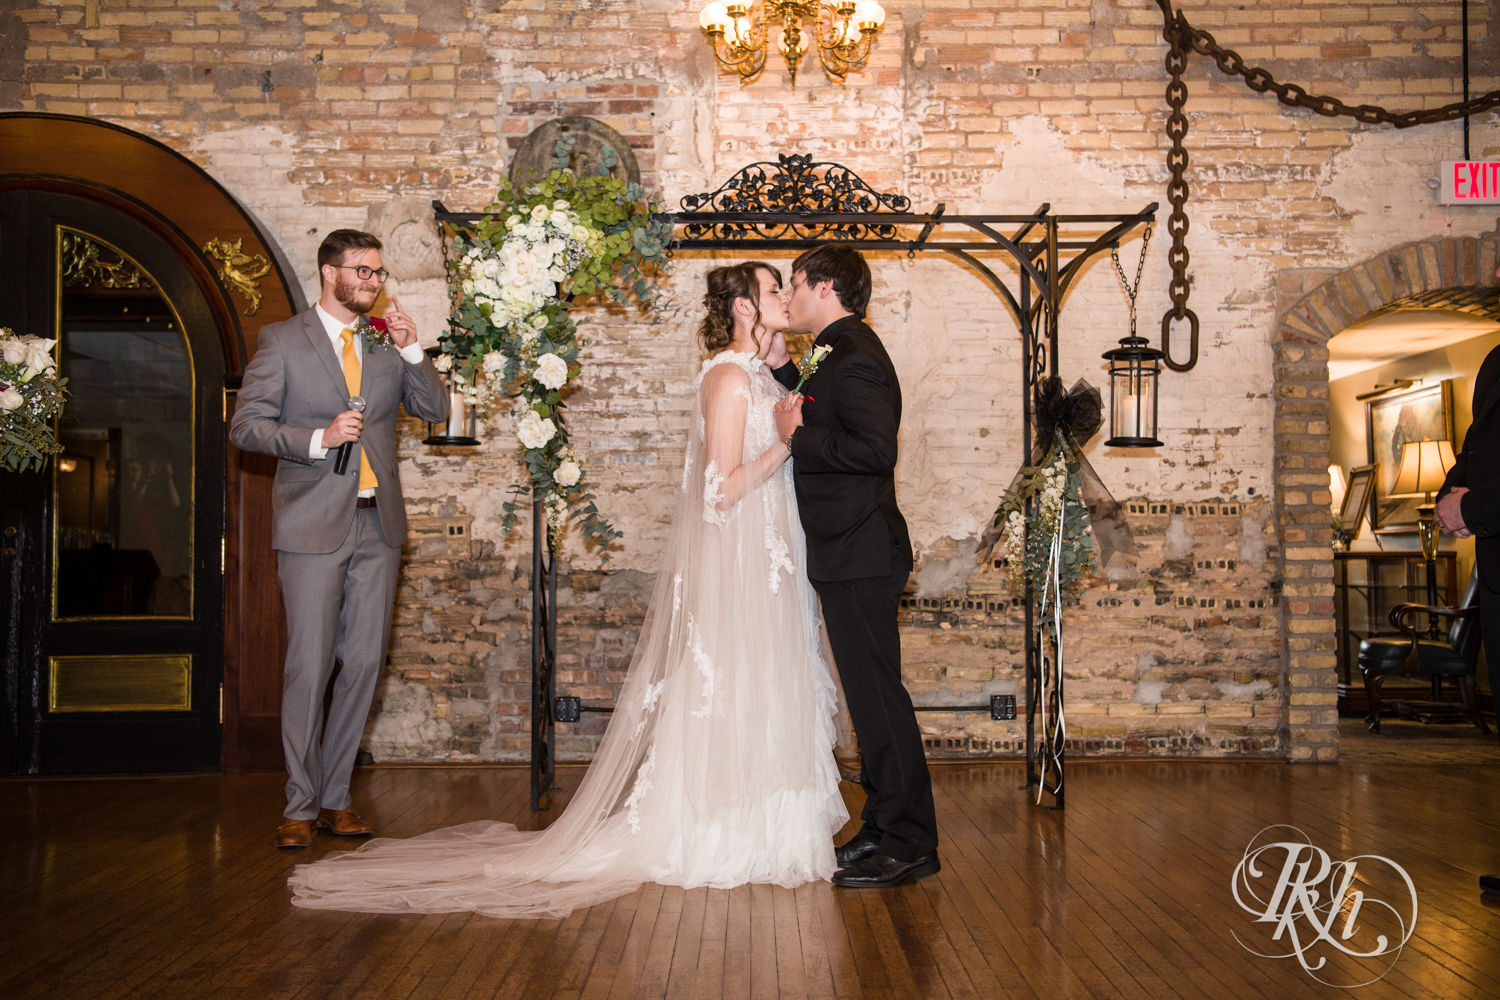 Bride and groom kiss at wedding ceremony at Kellerman's Event Center in White Bear Lake, Minnesota.